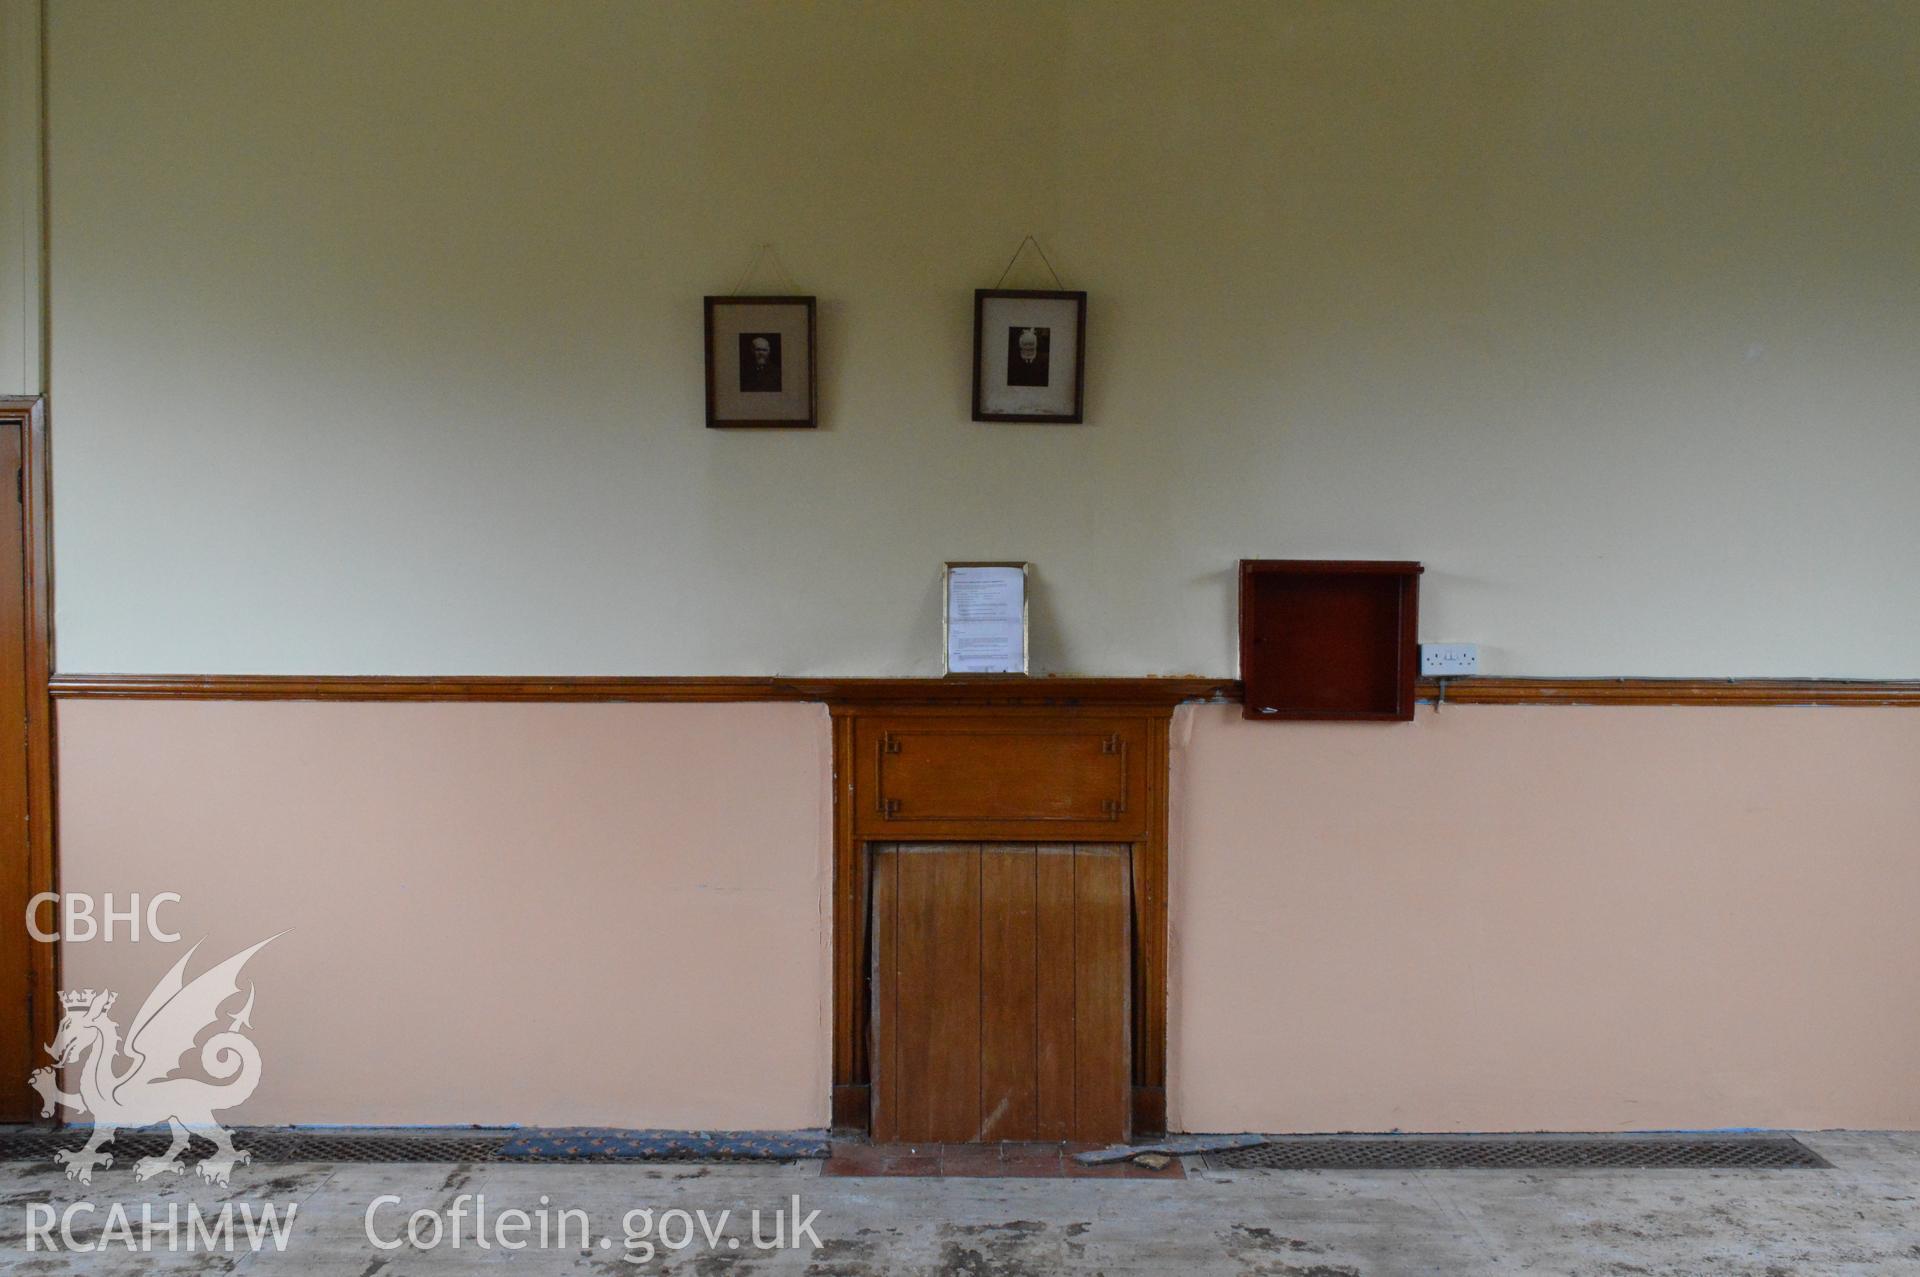 Internal view of the east elevation in the eastern room (fireplace). Digital colour photograph taken during CPAT Project 2396 at the United Reformed Church in Northop. Prepared by Clwyd Powys Archaeological Trust, 2018-2019.